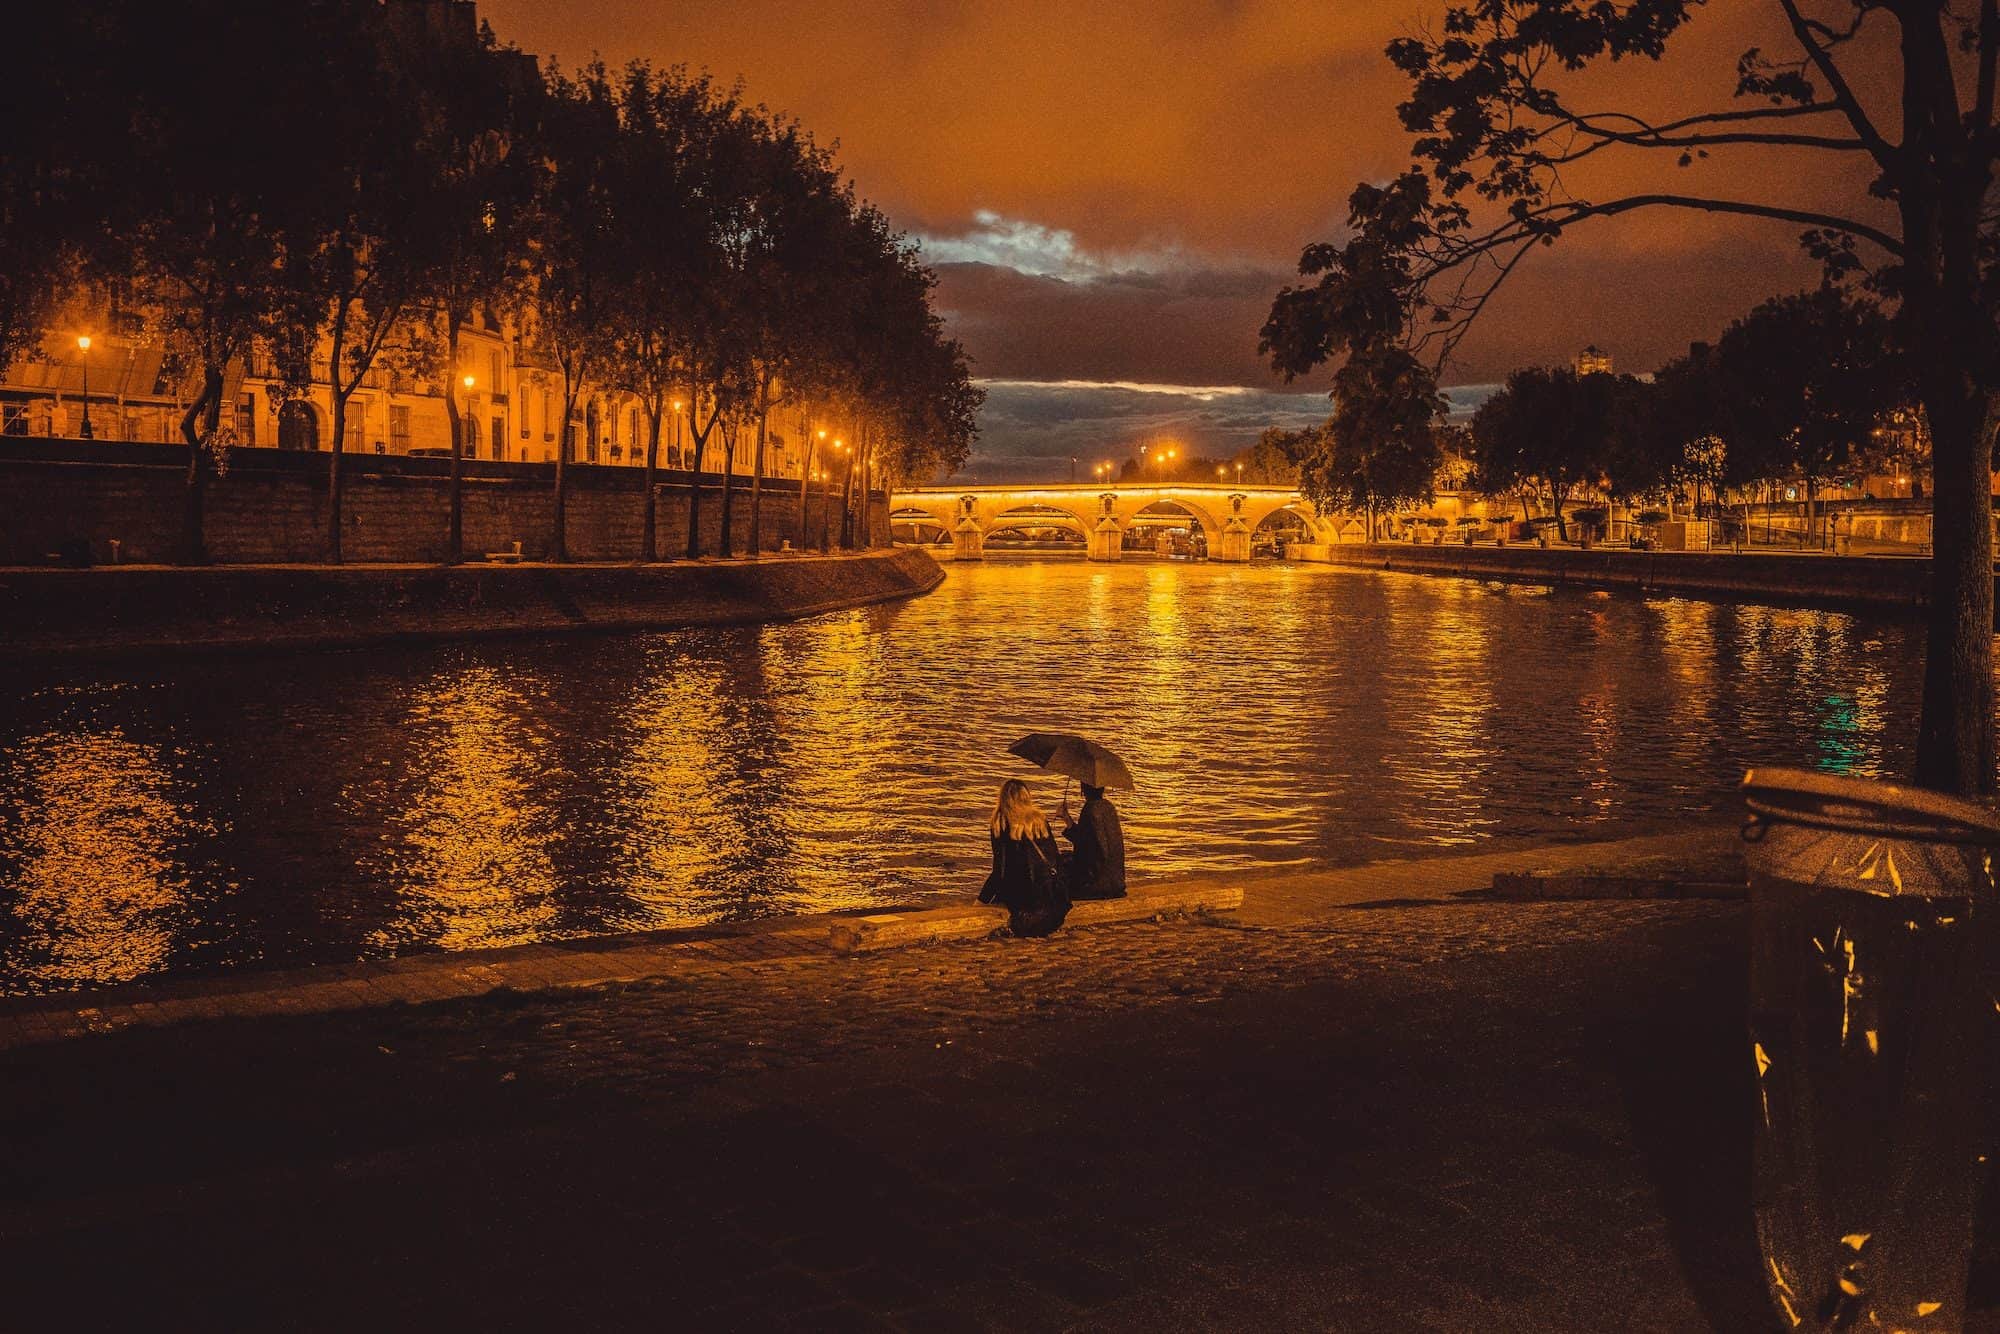 A couple having a date in the rain, sitting on the banks of the River Seine.